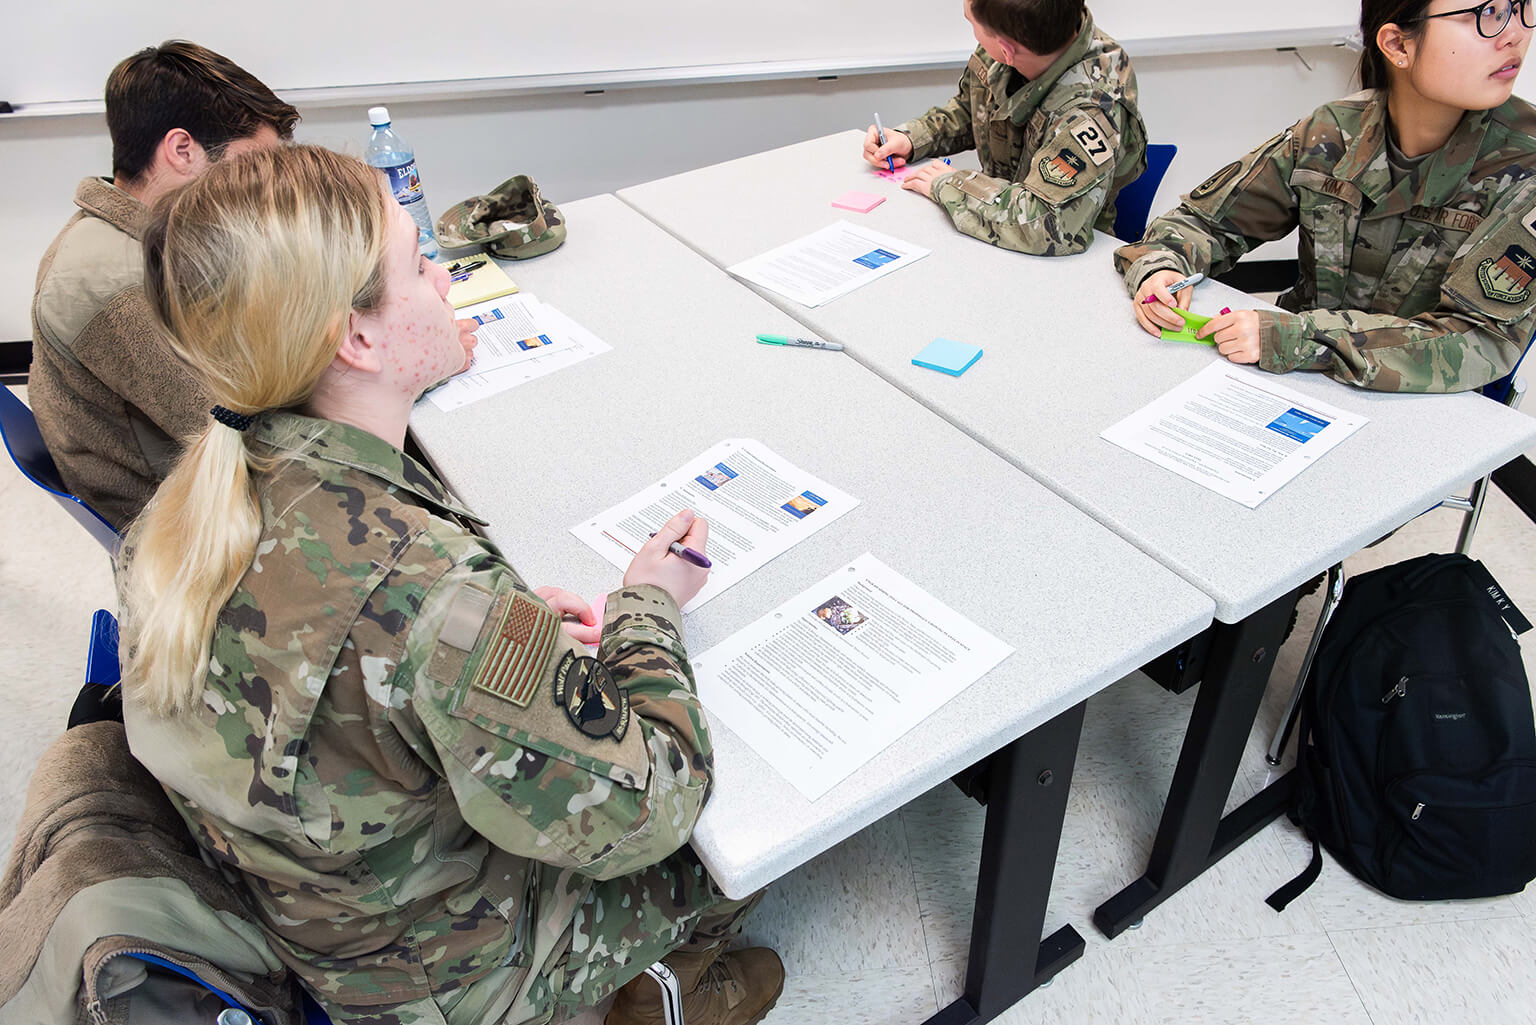 Academy cadets attend a class about warfighter-centric problem solving